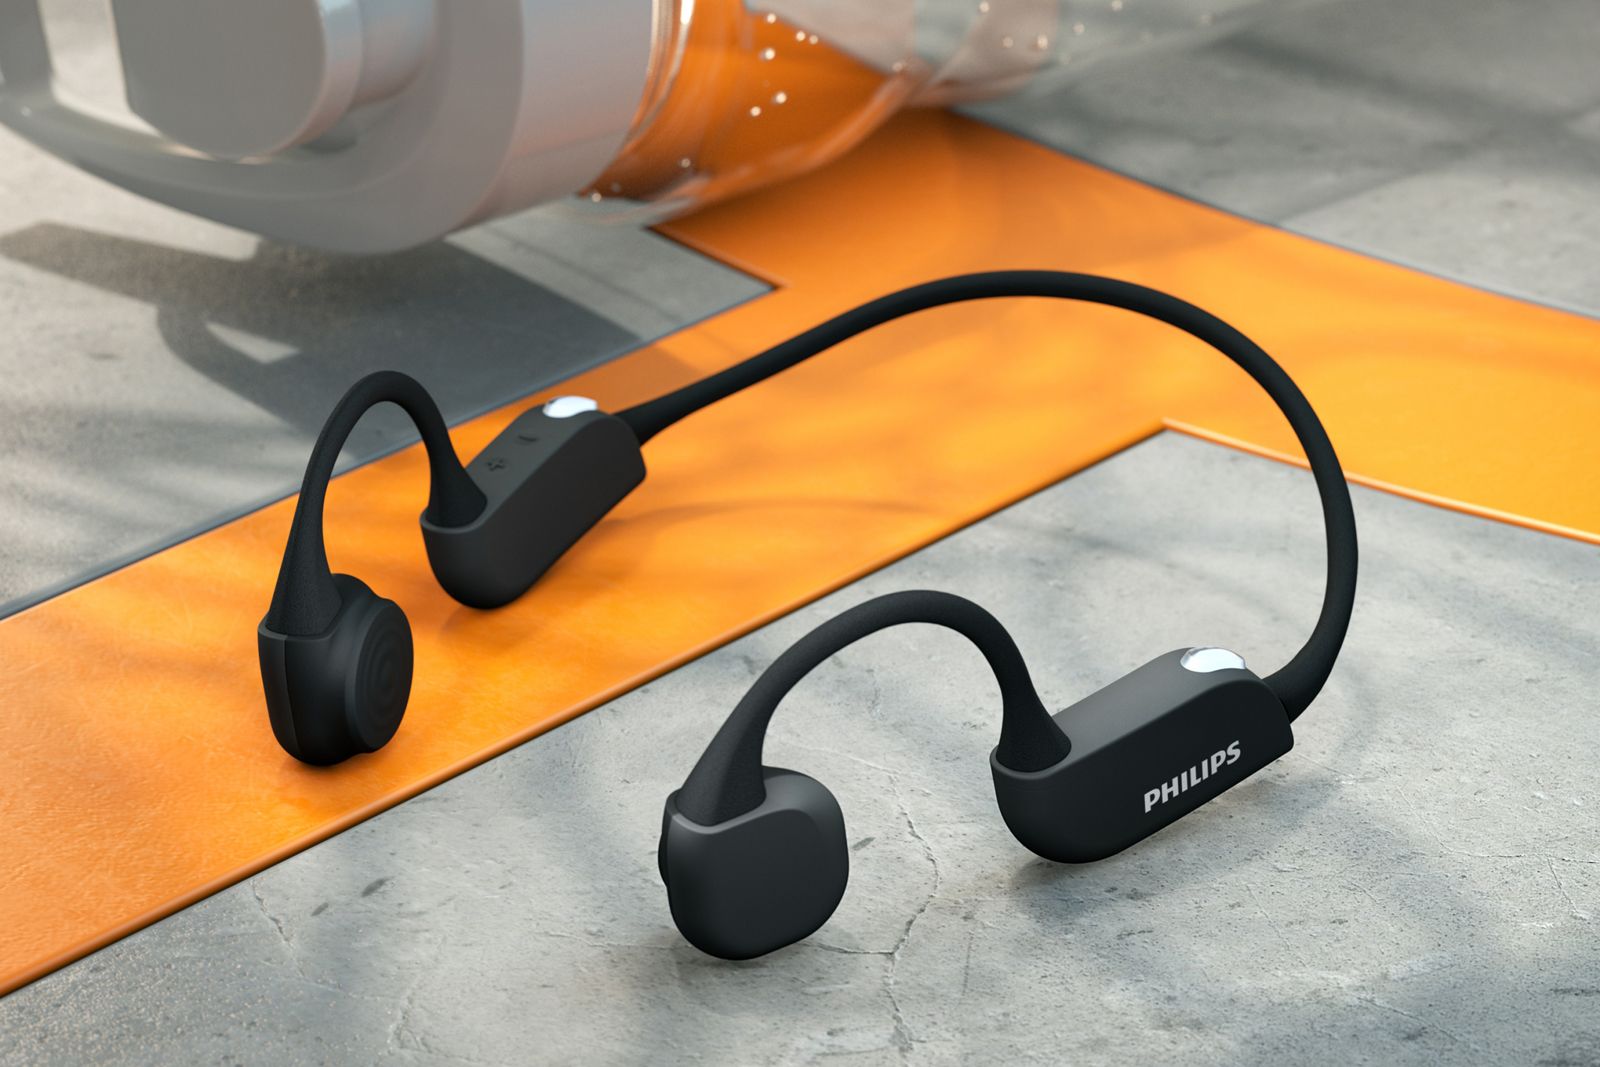 Philips now have four new sports headphones photo 4